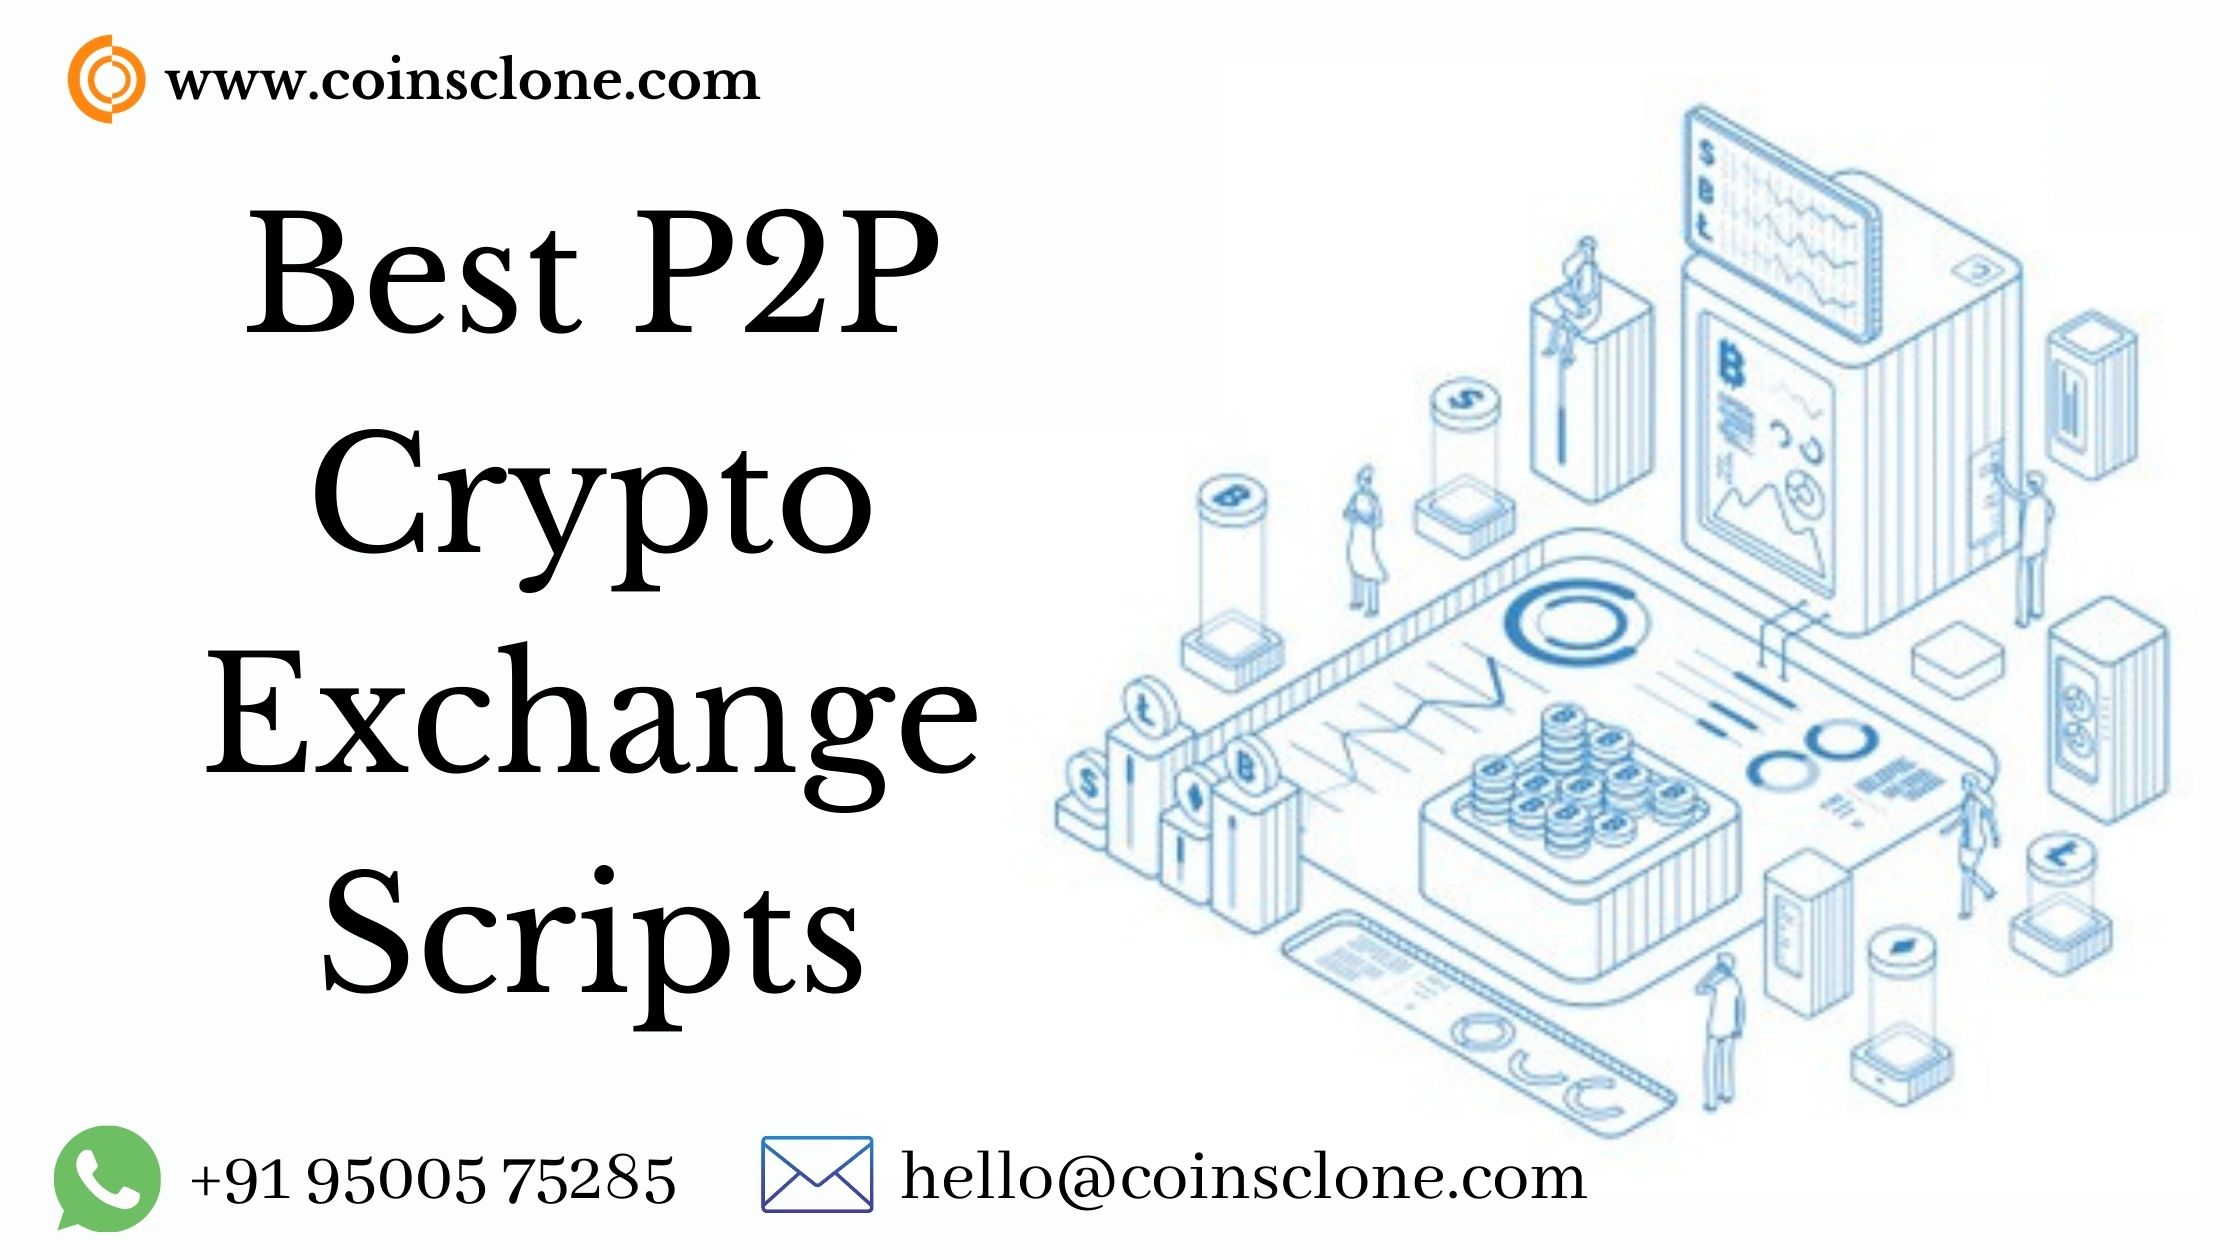 Article about Which is the best P2P crypto exchange script